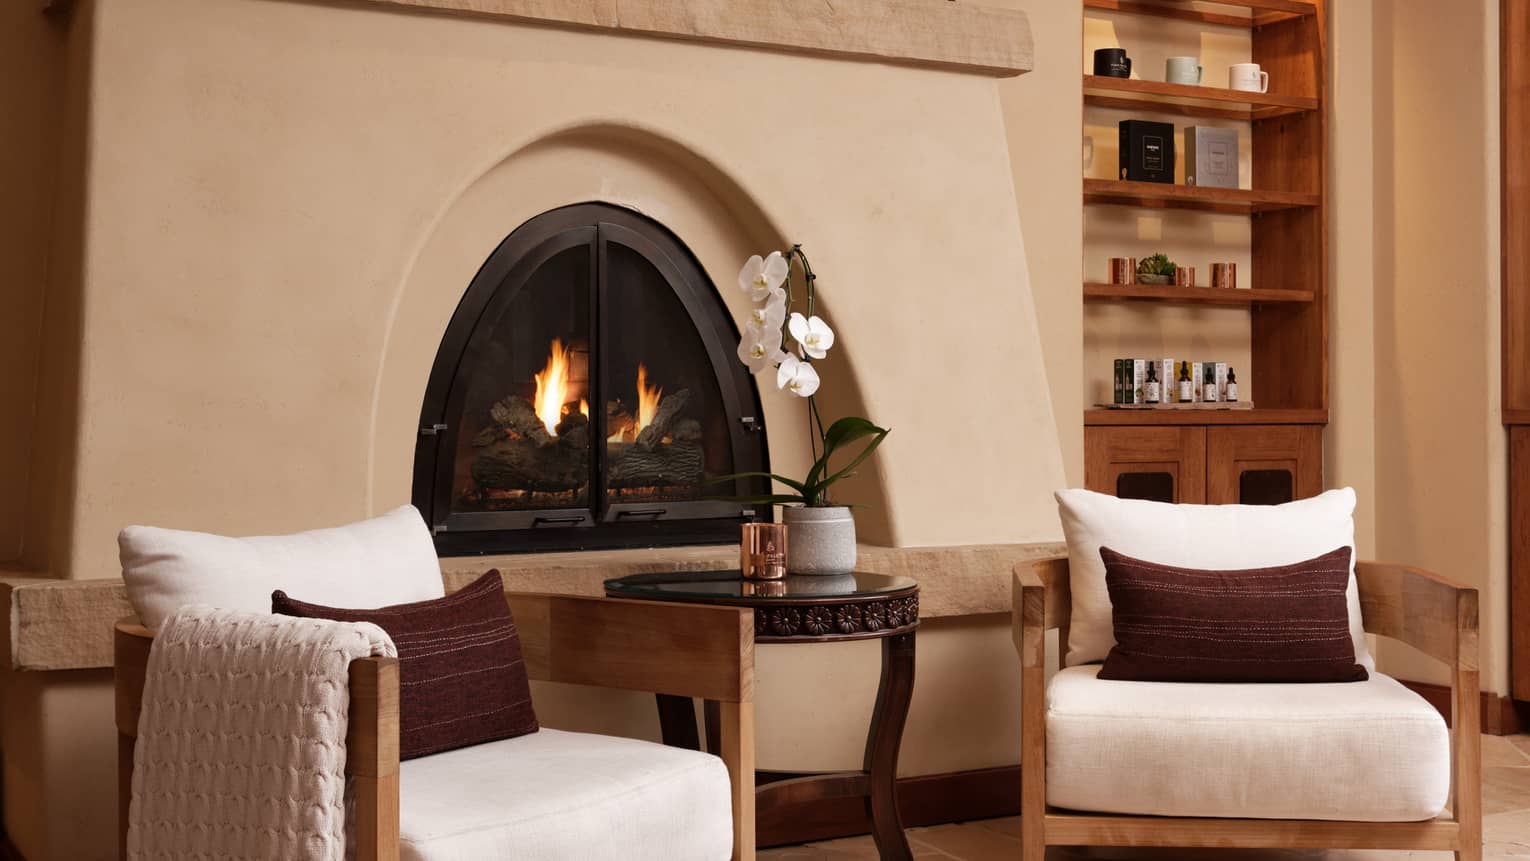 A sitting area with a fireplace, chairs and a small table.